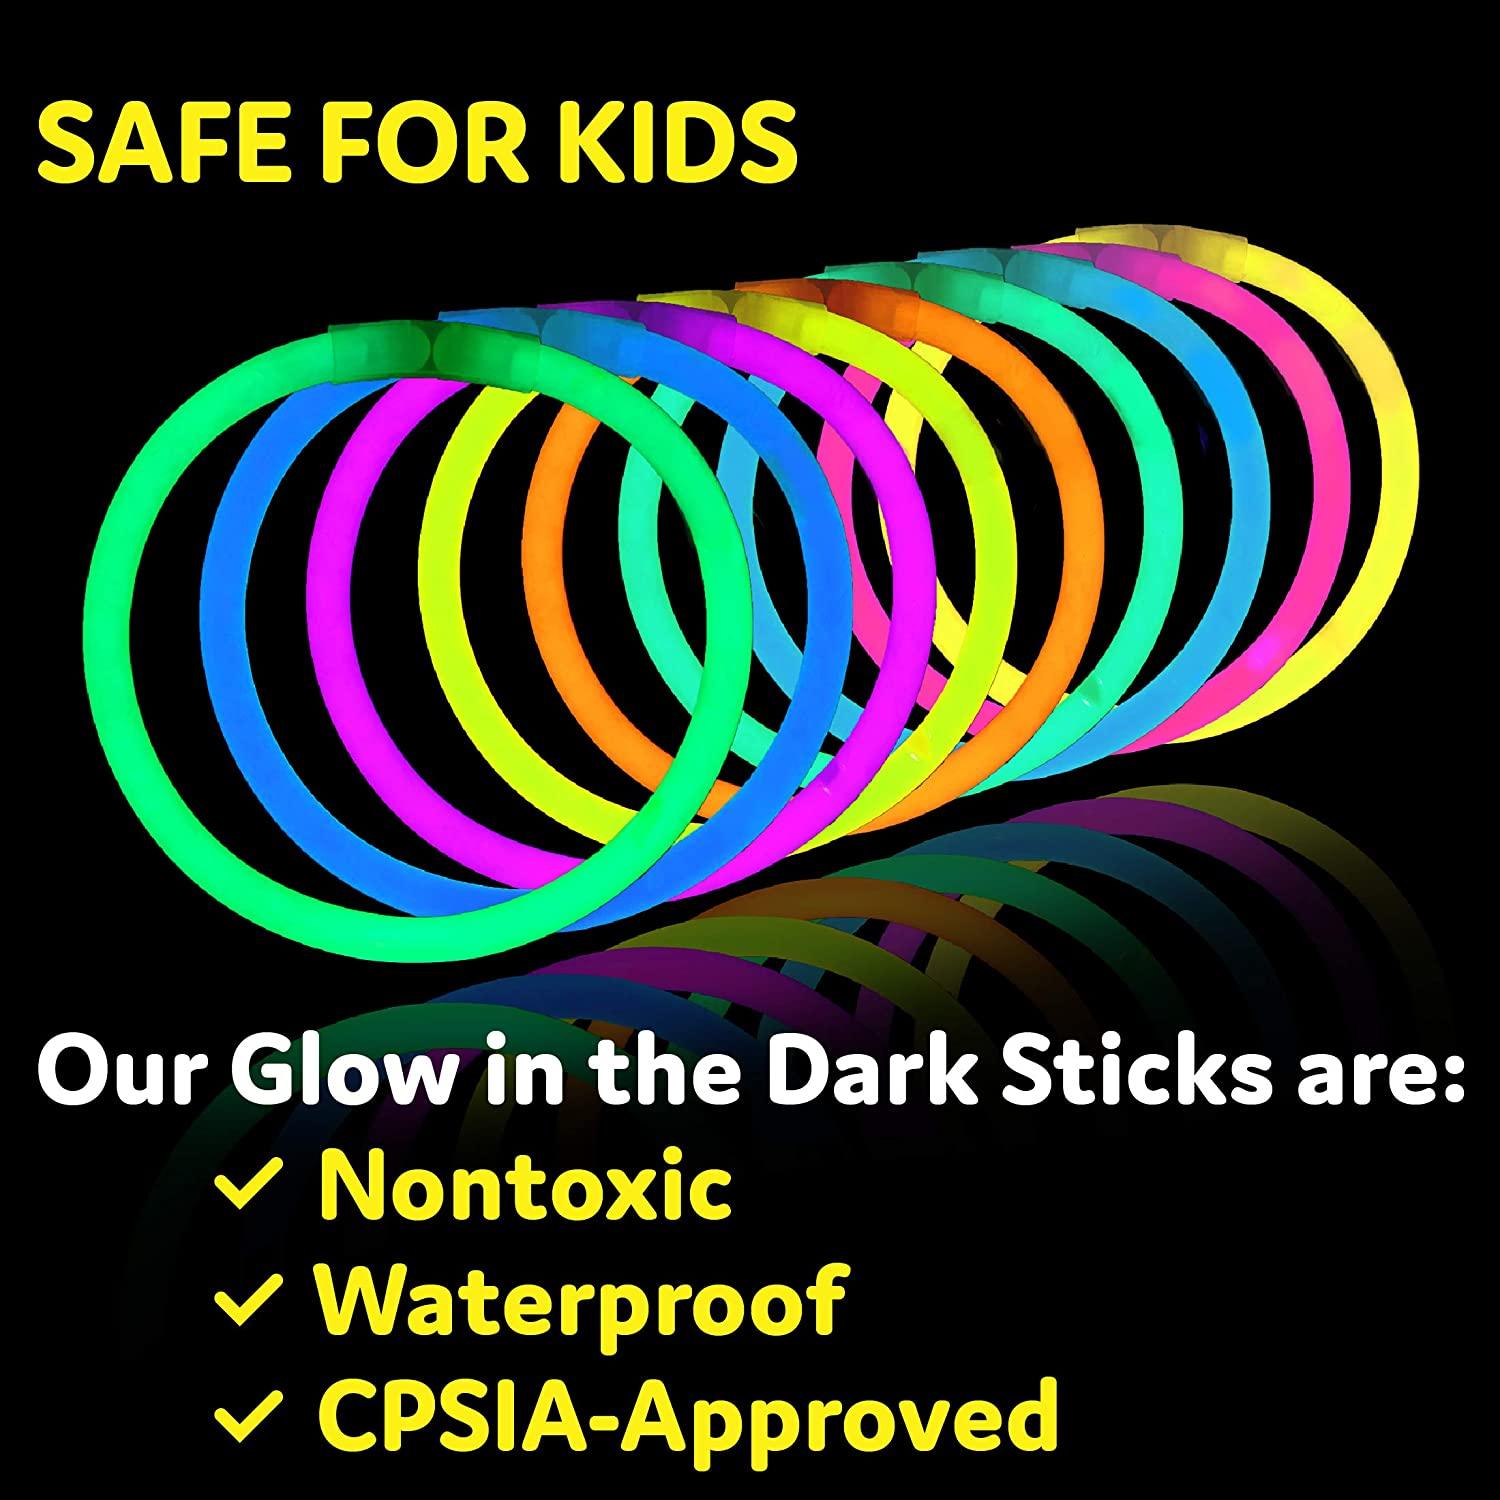 Glow Sticks Party Supplies 8 Inch Glow in the Dark Light Up Sticks Glow Party Decorations Favors, Neon Party Glow Necklaces Bracelets with Connectors - Decotree.co Online Shop